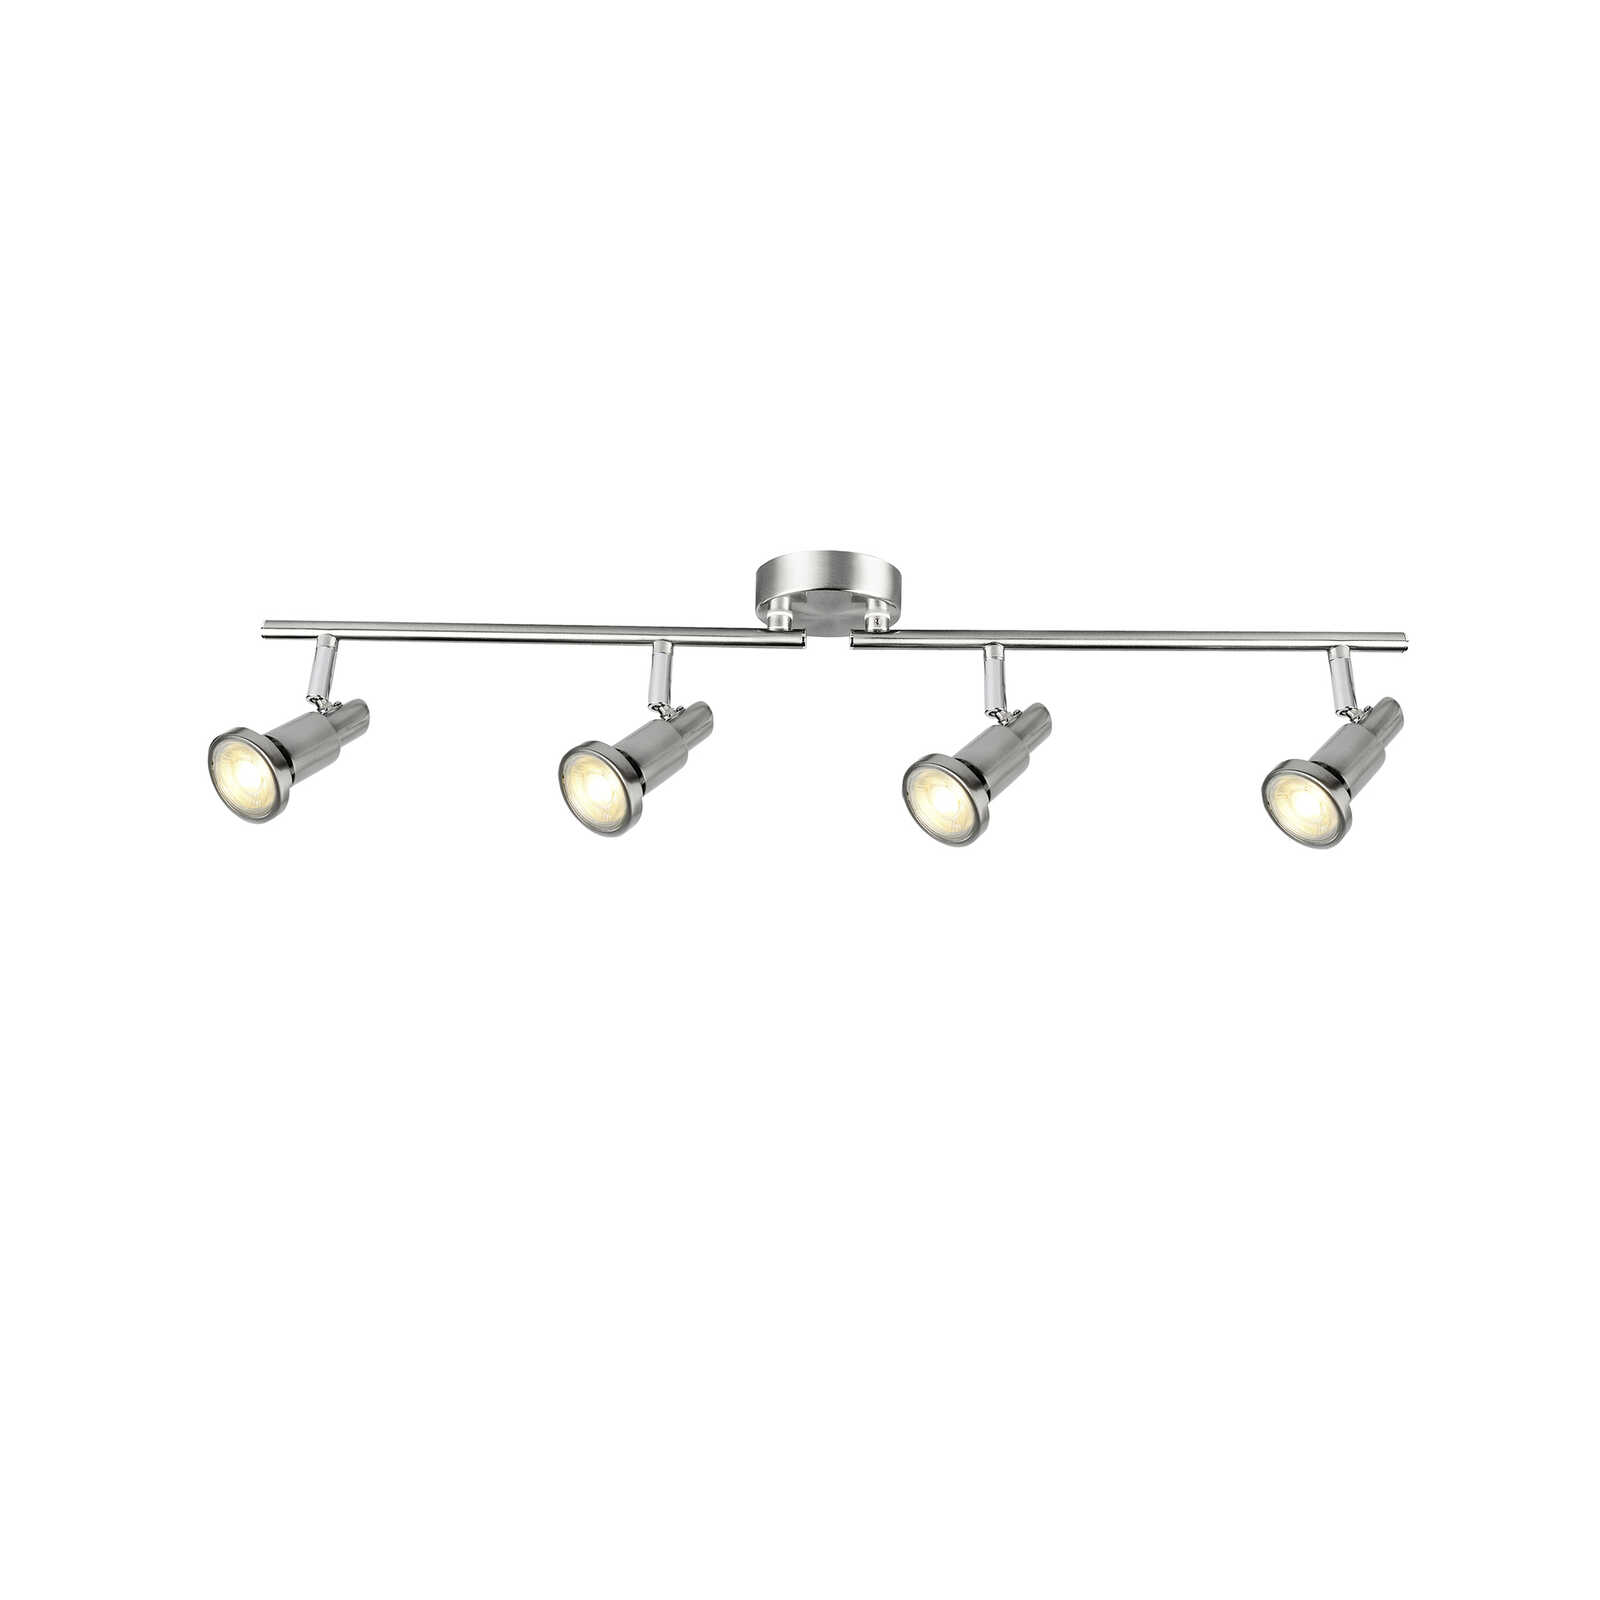 Metal ceiling light - Mika - Silver
